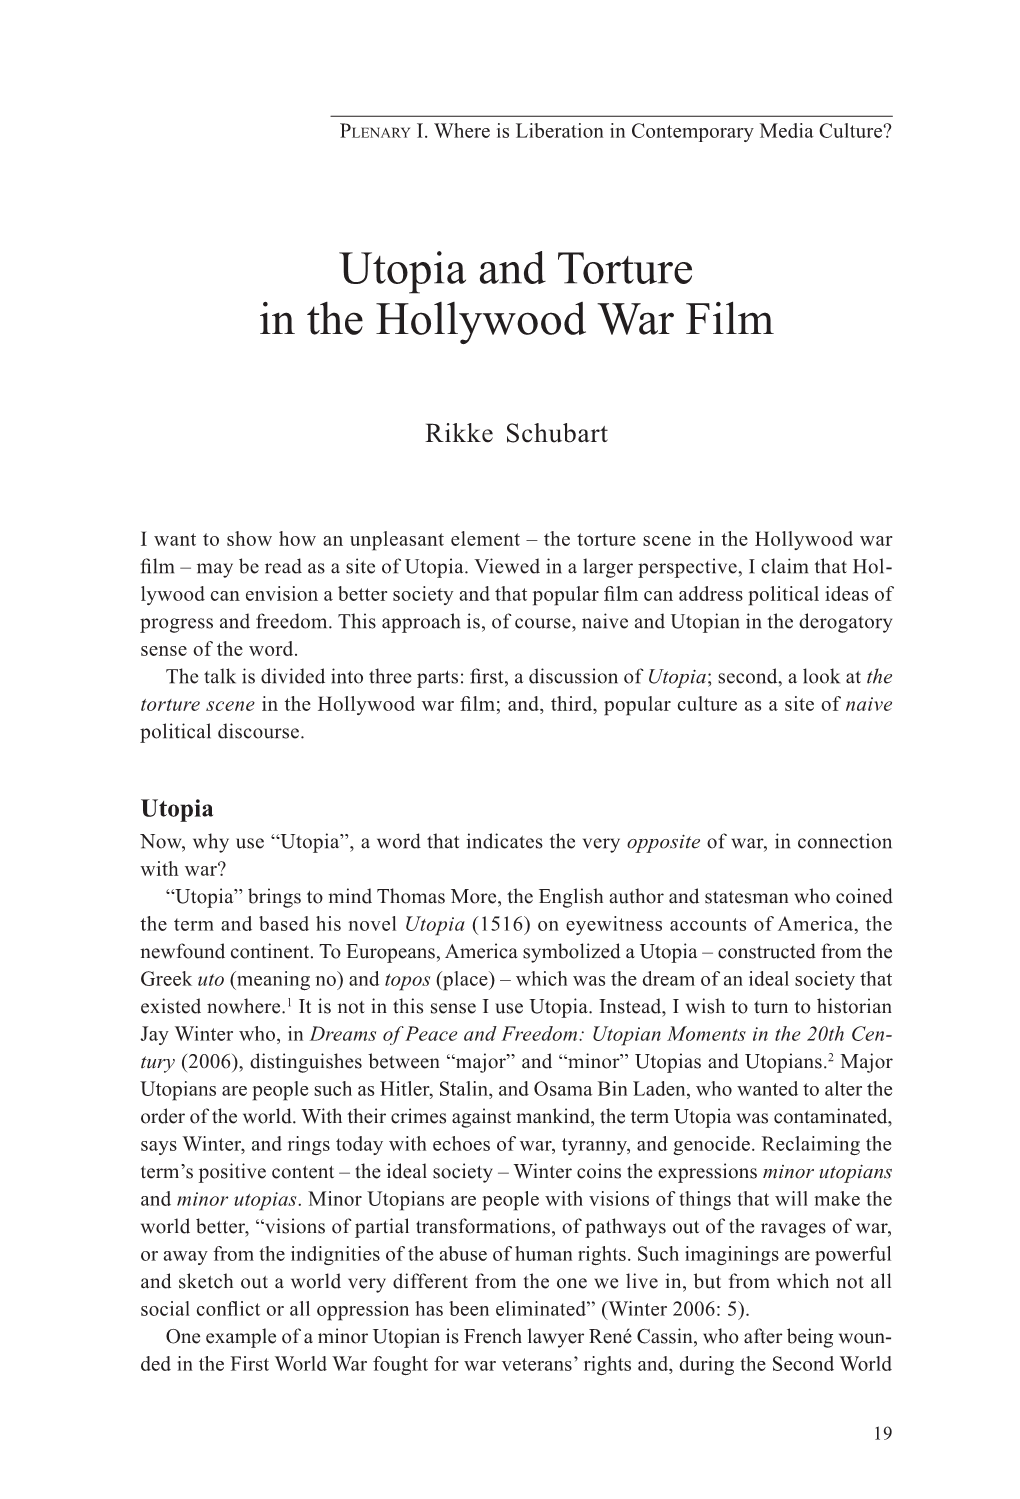 Utopia and Torture in the Hollywood War Film